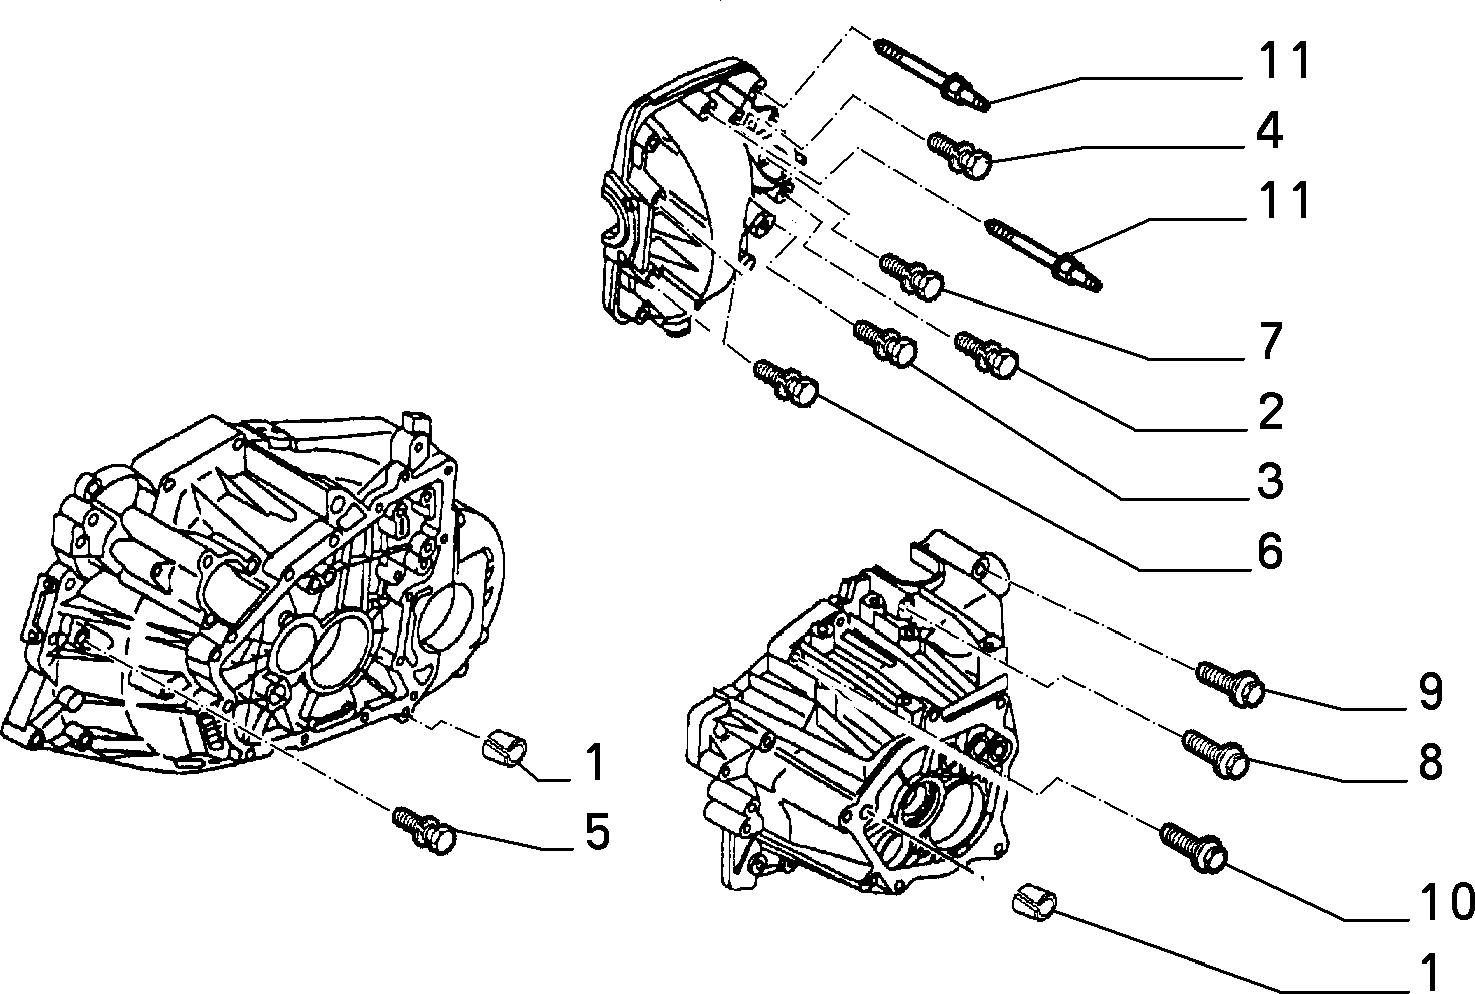 TRANSMISSION AND DIFFERENTIAL UNIT, CASING AND COVERS สำหรับ Lancia ZETA "Z" (1994 - 2002)